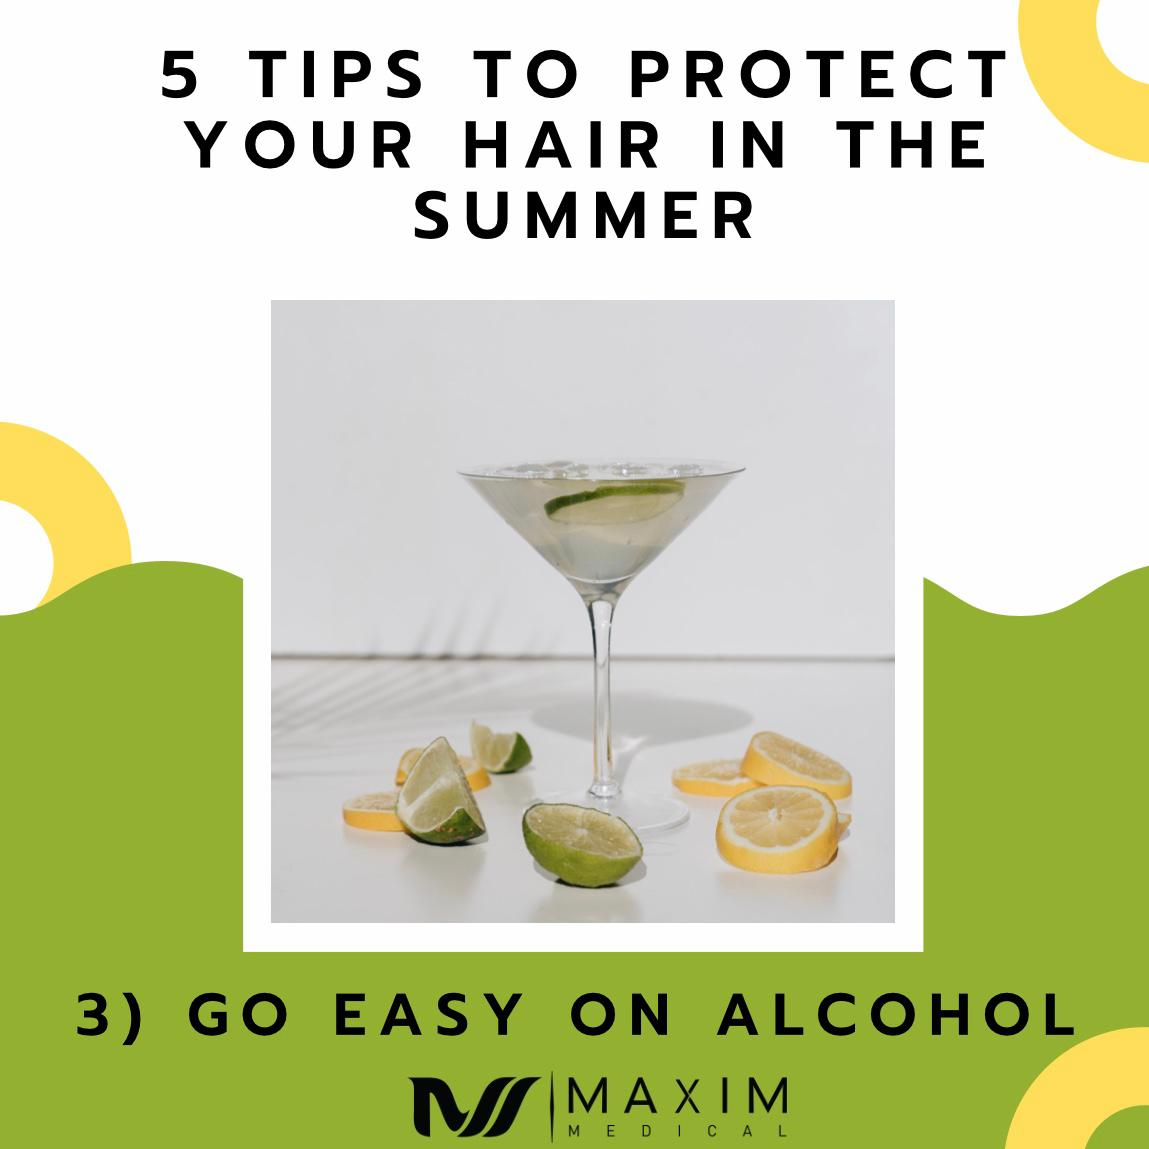 5 Tips To Protect Your Hair In The Summer

3. Go Easy On Alcohol
It can be difficult to resist the temptation to quench your thirst with your favorite drink. However, it’s very easy to forget how alcohol can dry out your body. Aside from its effects on your body, it can also negatively affect your hair. Due to alcohol’s nature, heavy alcohol consumption can result in dry and brittle hair.